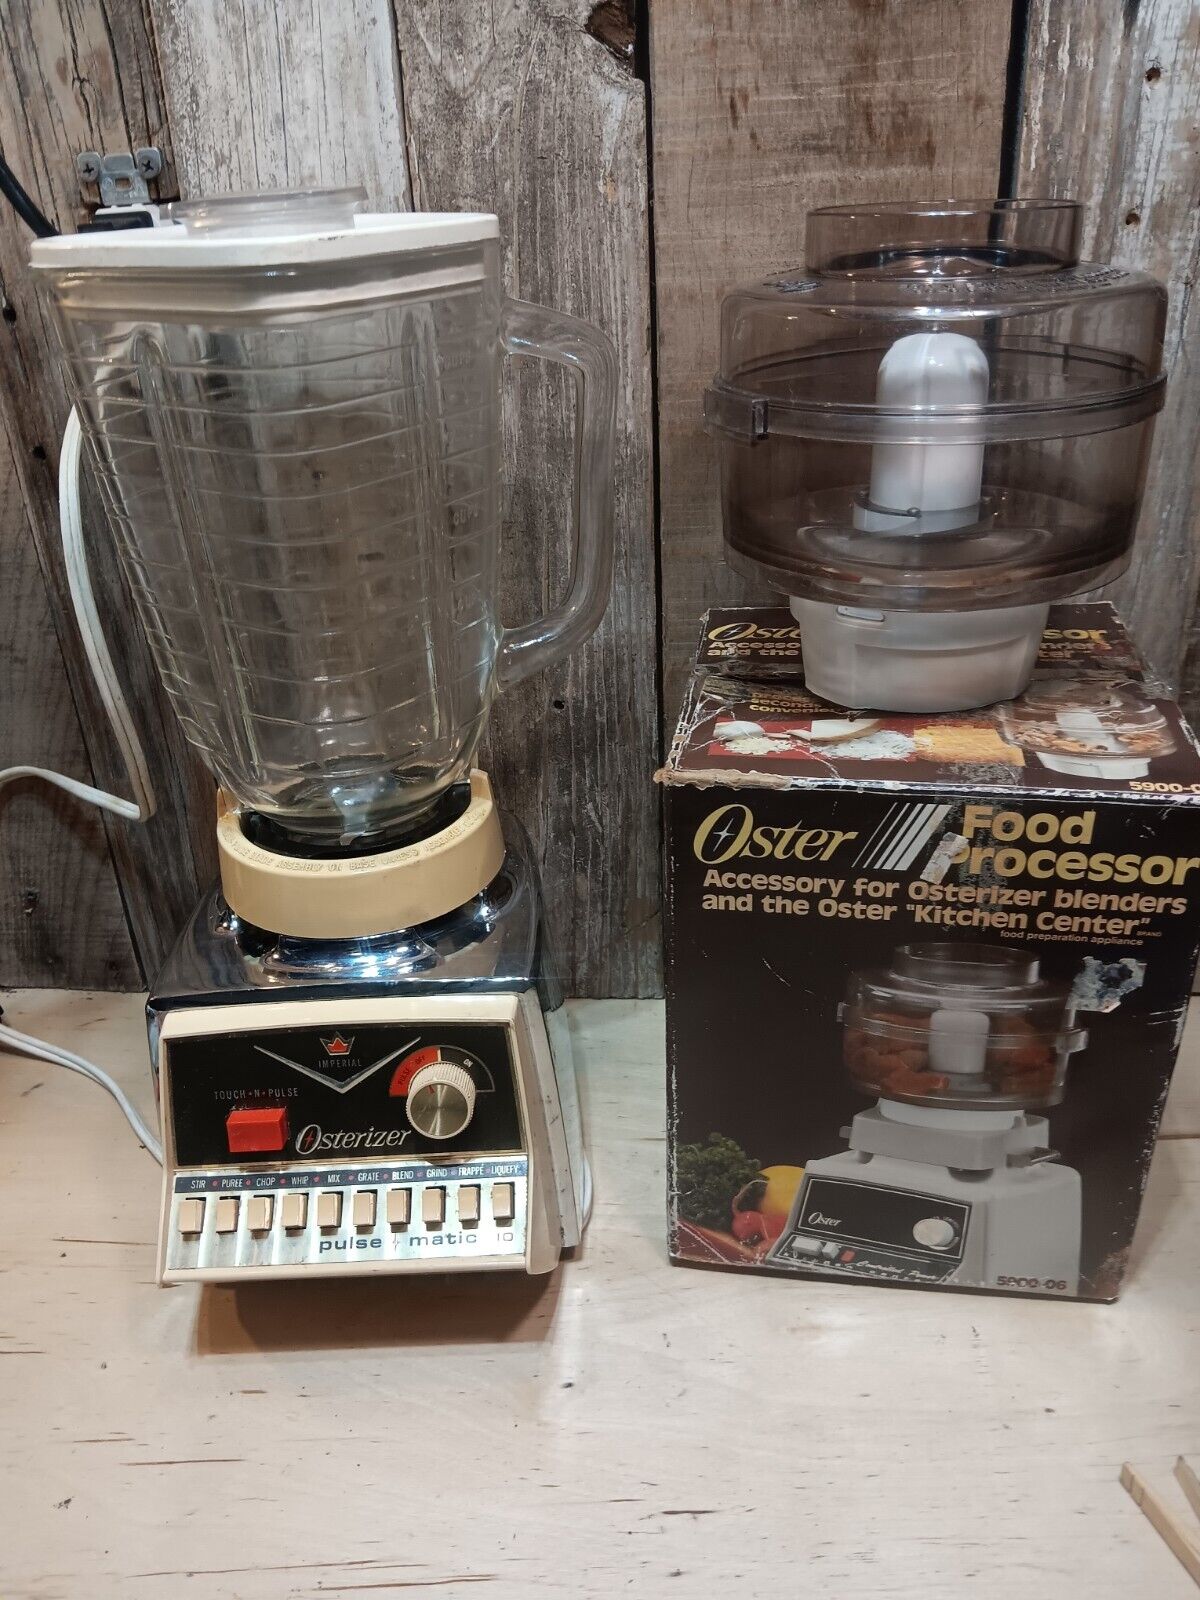 Vintage Imperial Osterizer Pulse-Matic 10  Blender W/ Food Processor Attachment